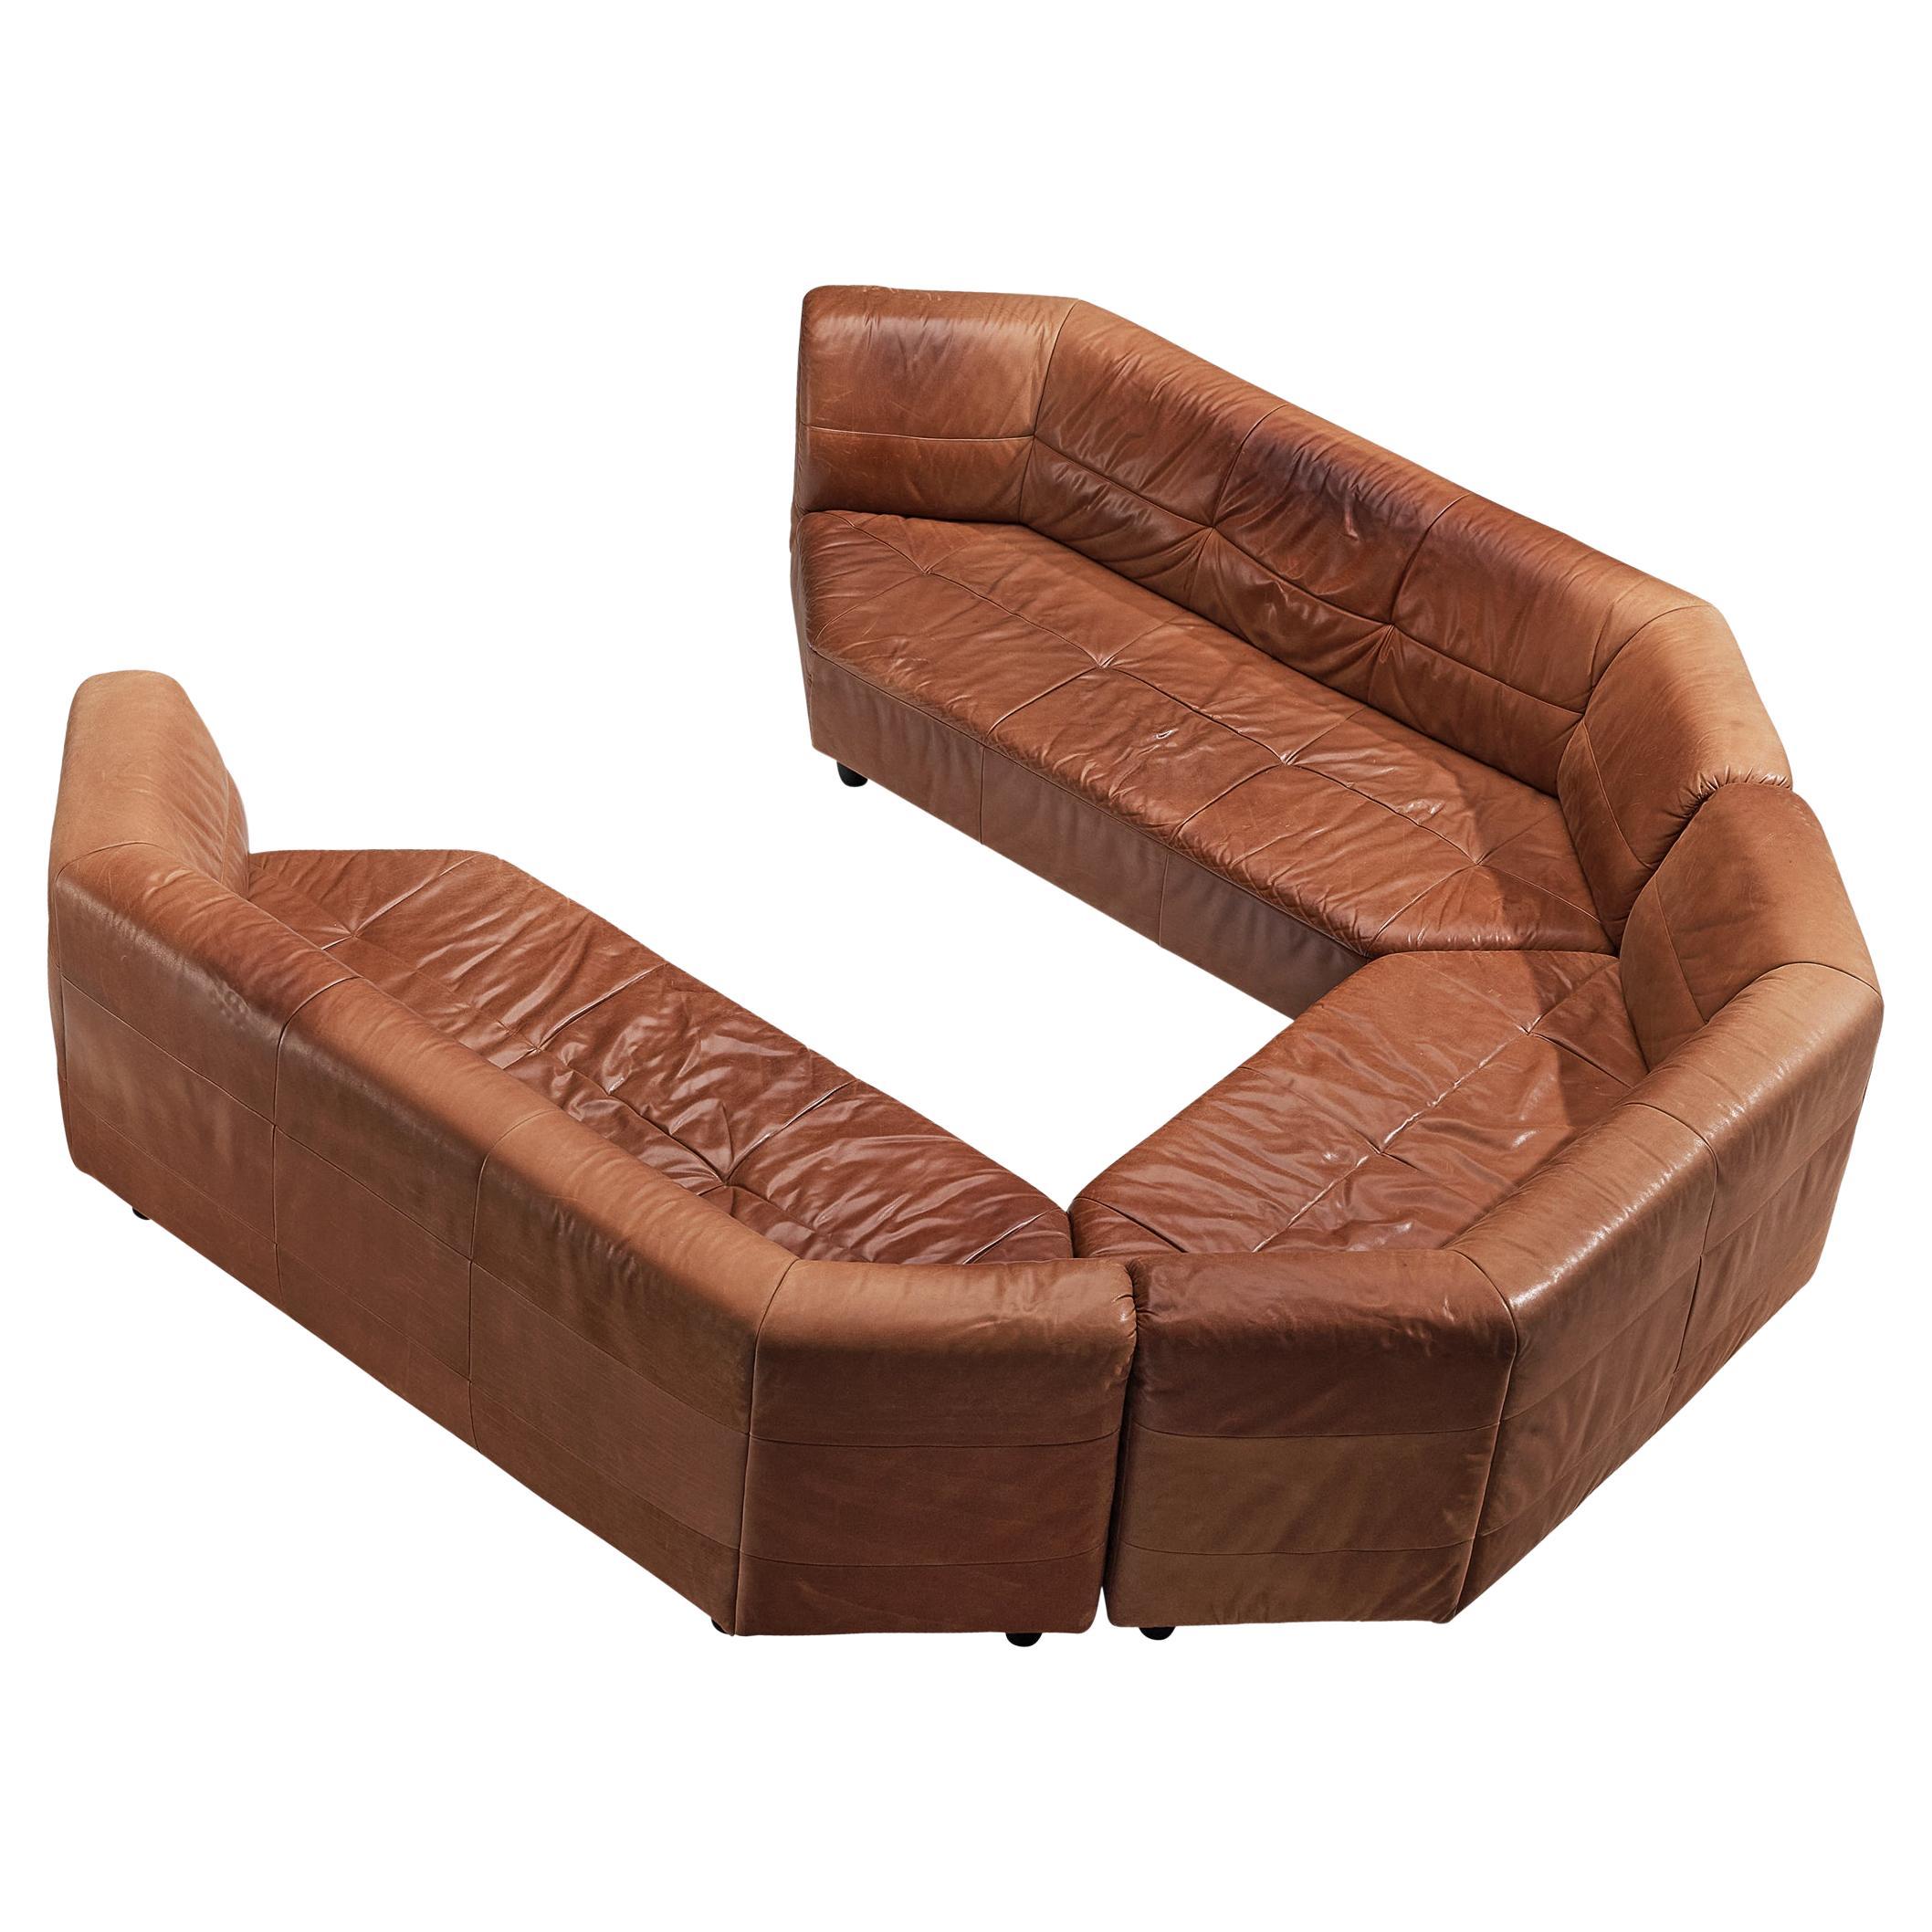 Grand Geometric Sectional Sofa in Cognac Leather 